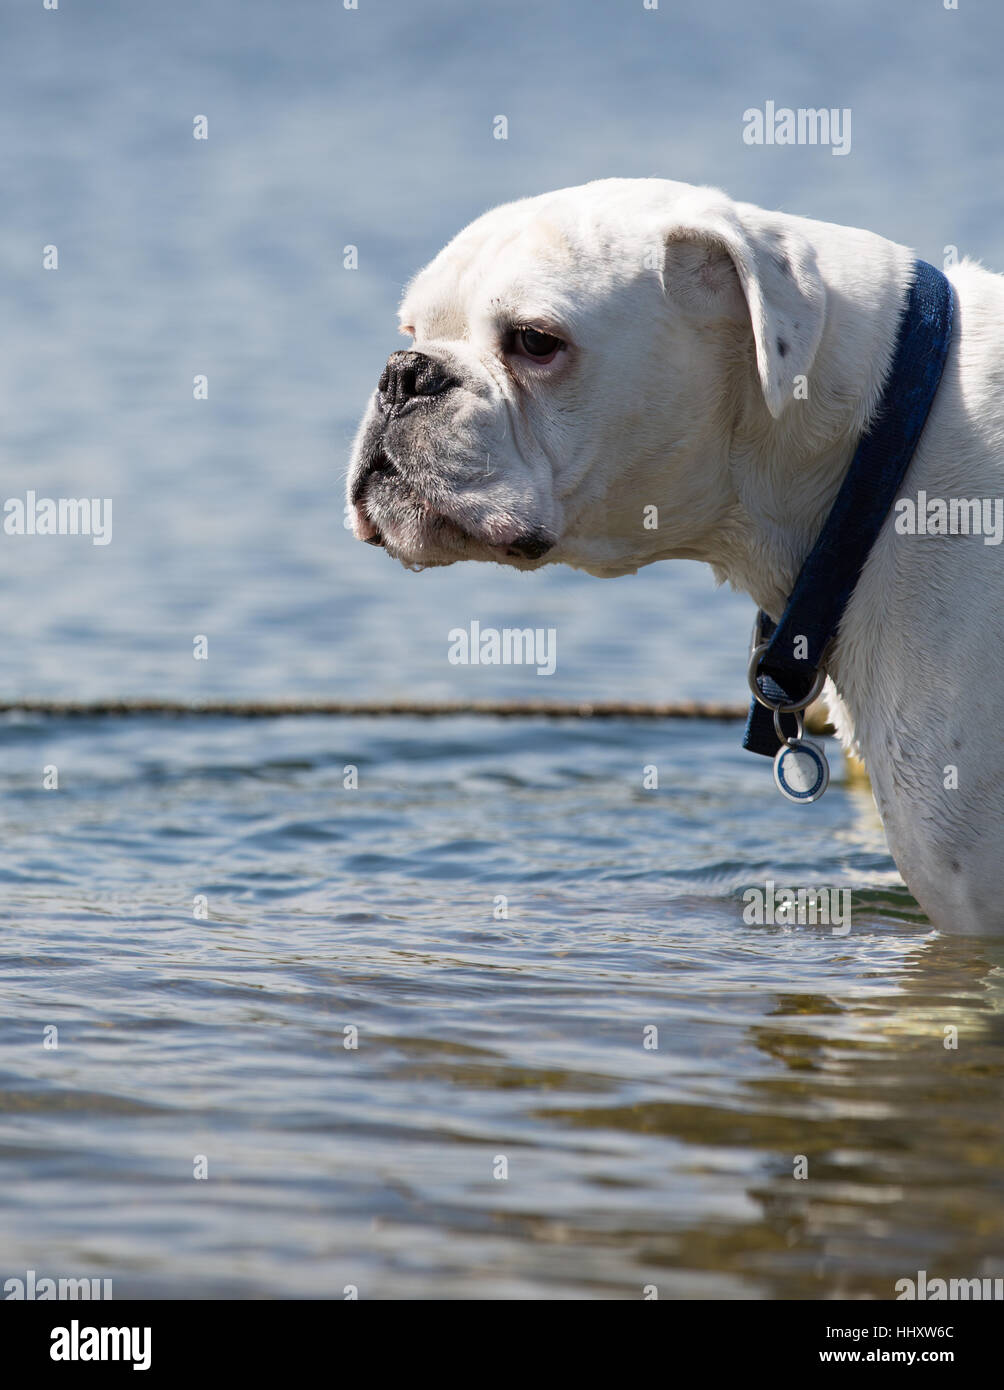 white male boxer dog standing in lake water Stock Photo